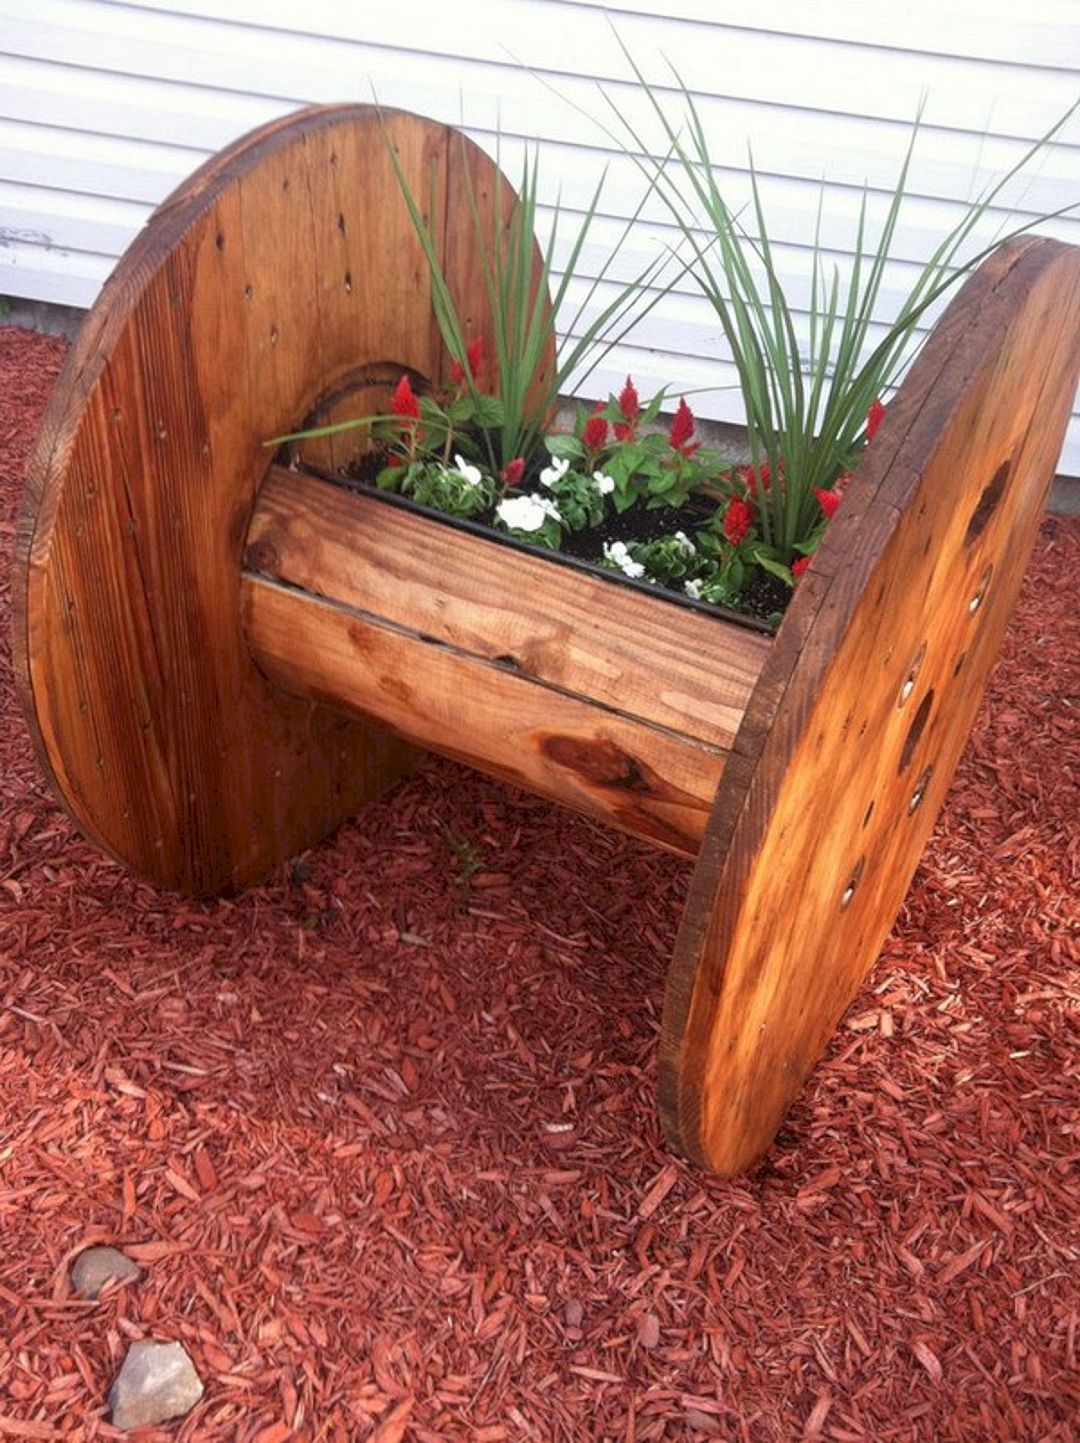 Marvelous Diy Recycled Wooden Spool Furniture Ideas For Your Home No 79